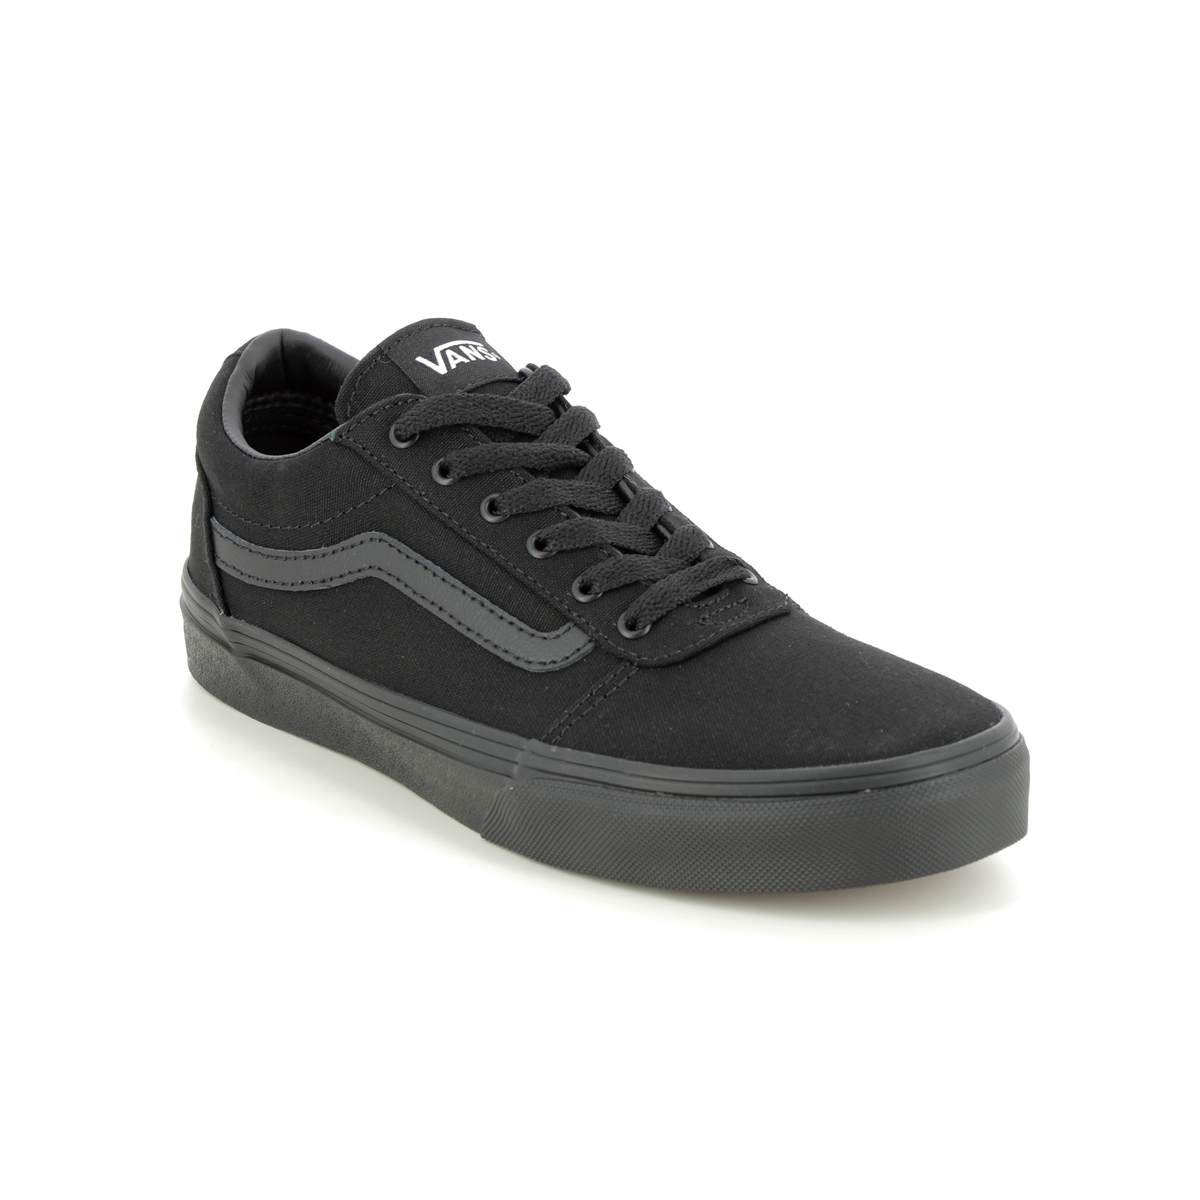 Vans Ward Yth Black Kids Trainers  Vn0A38J91-861 In Size 4 In Plain Black Vans Boys Trainers For kids